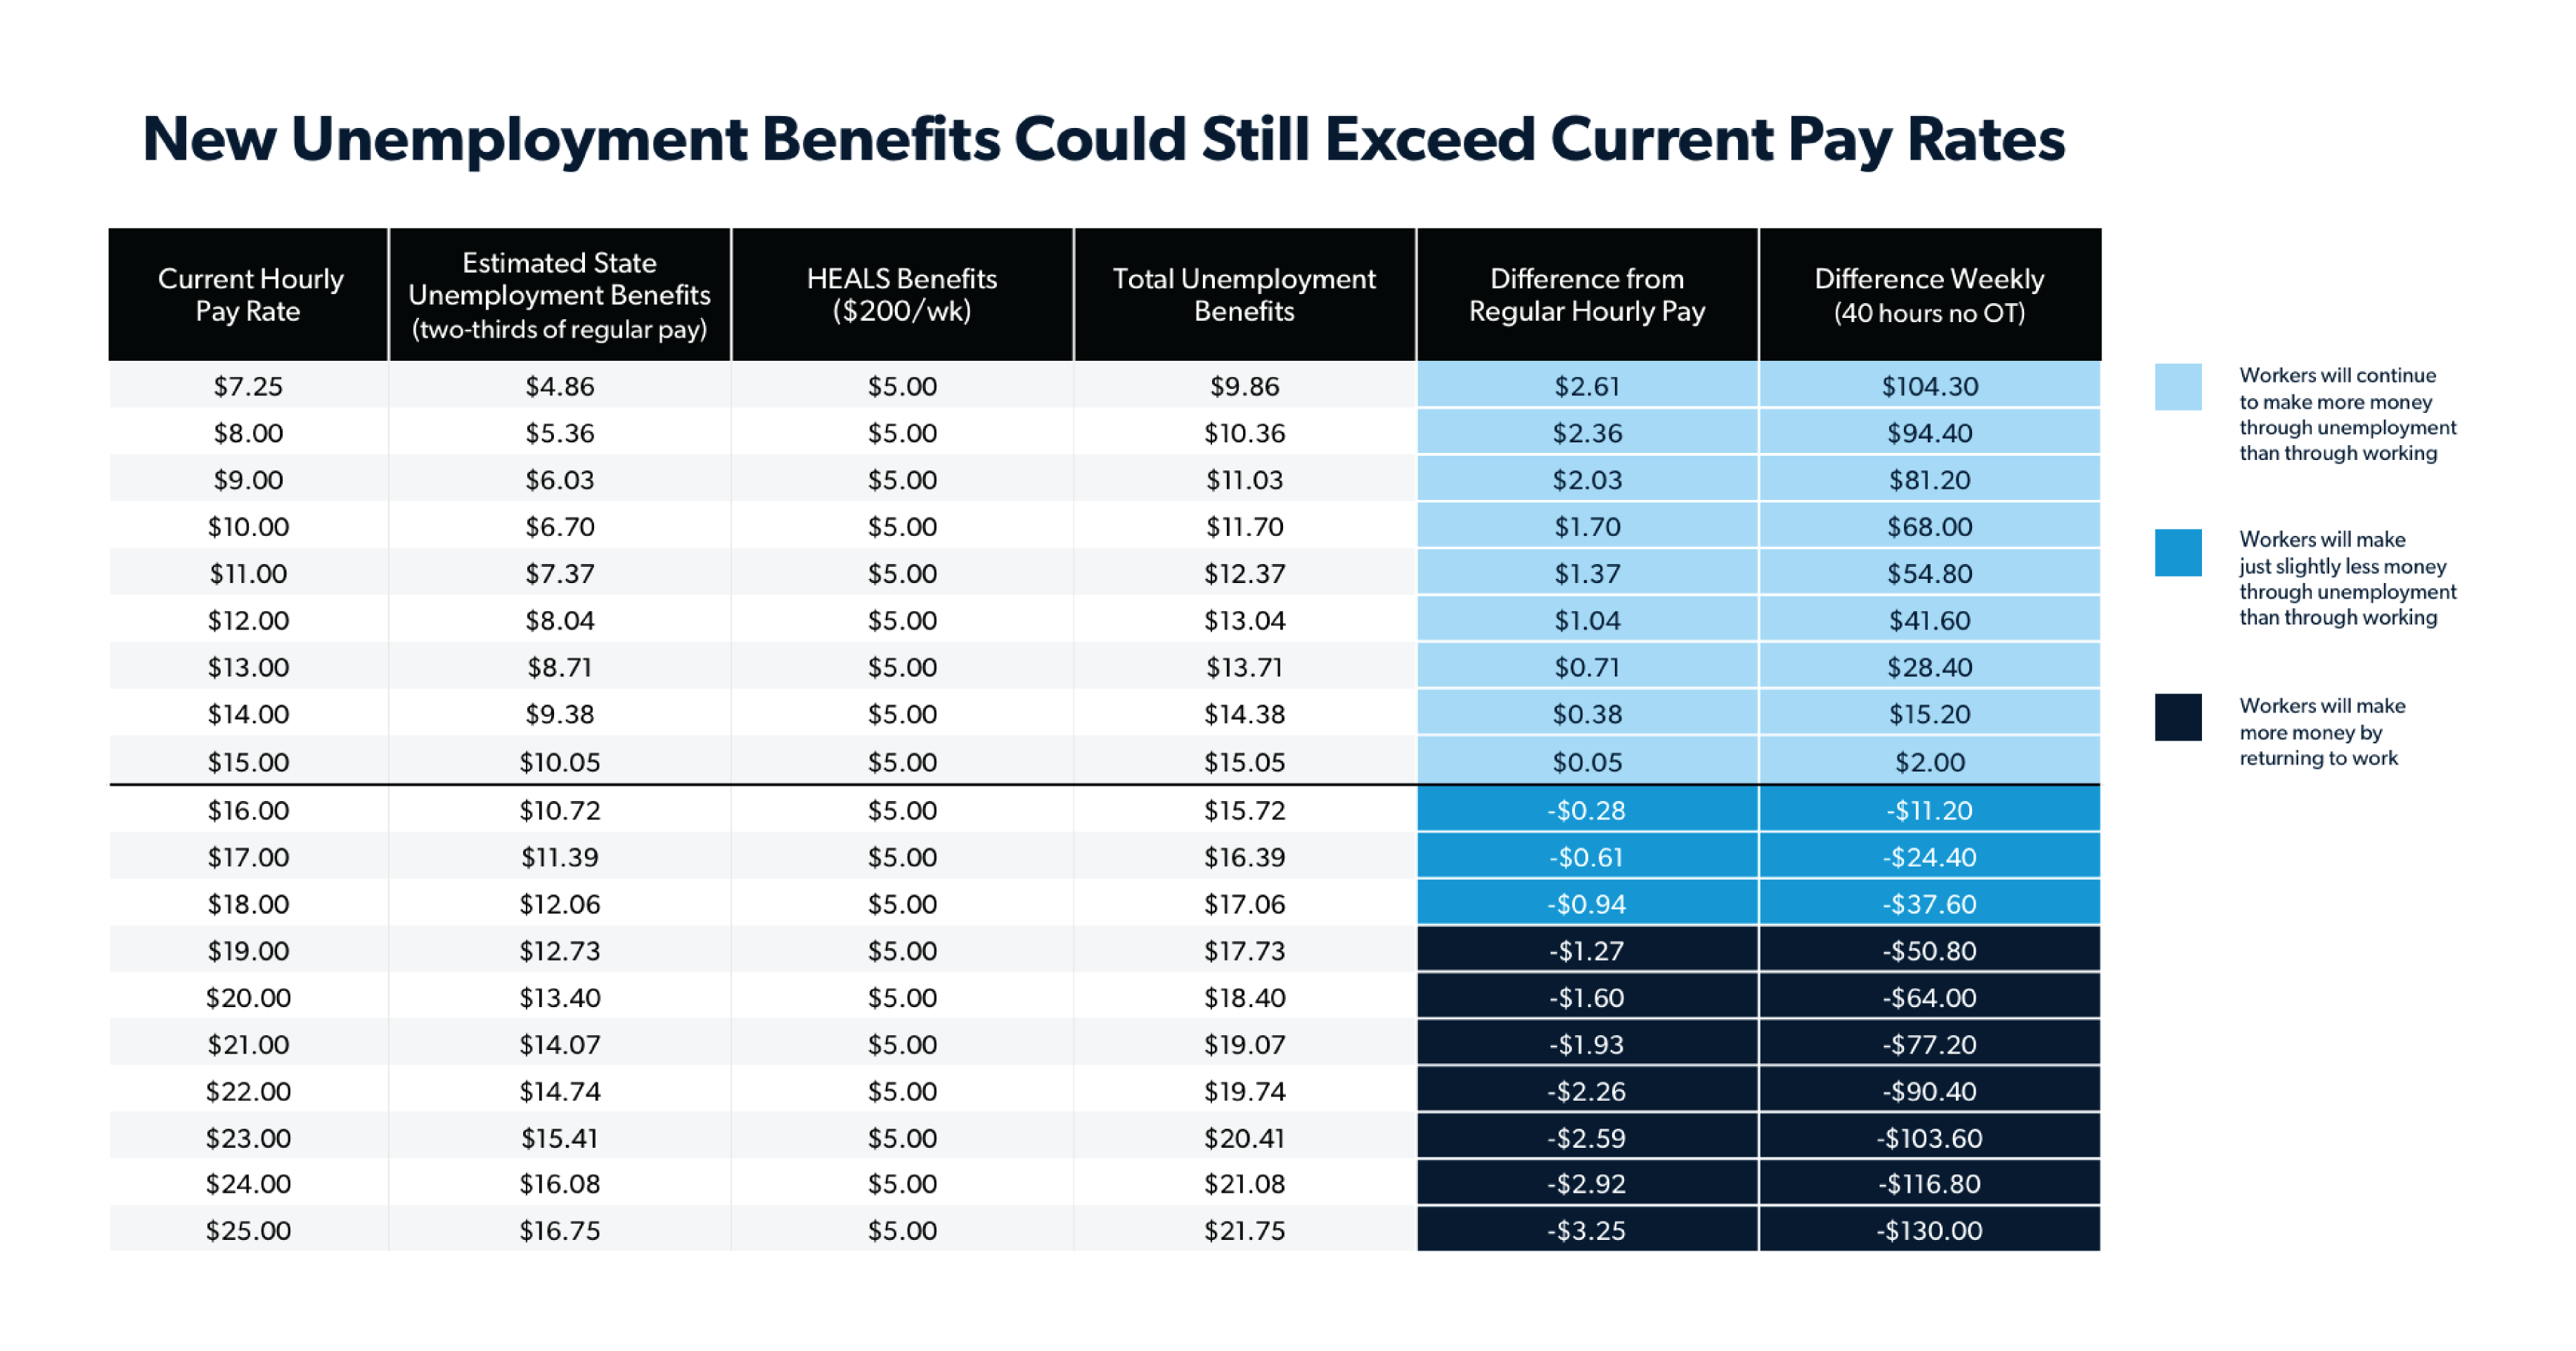 AGS_Blog_UnemploymentBenefits_Chart_V2